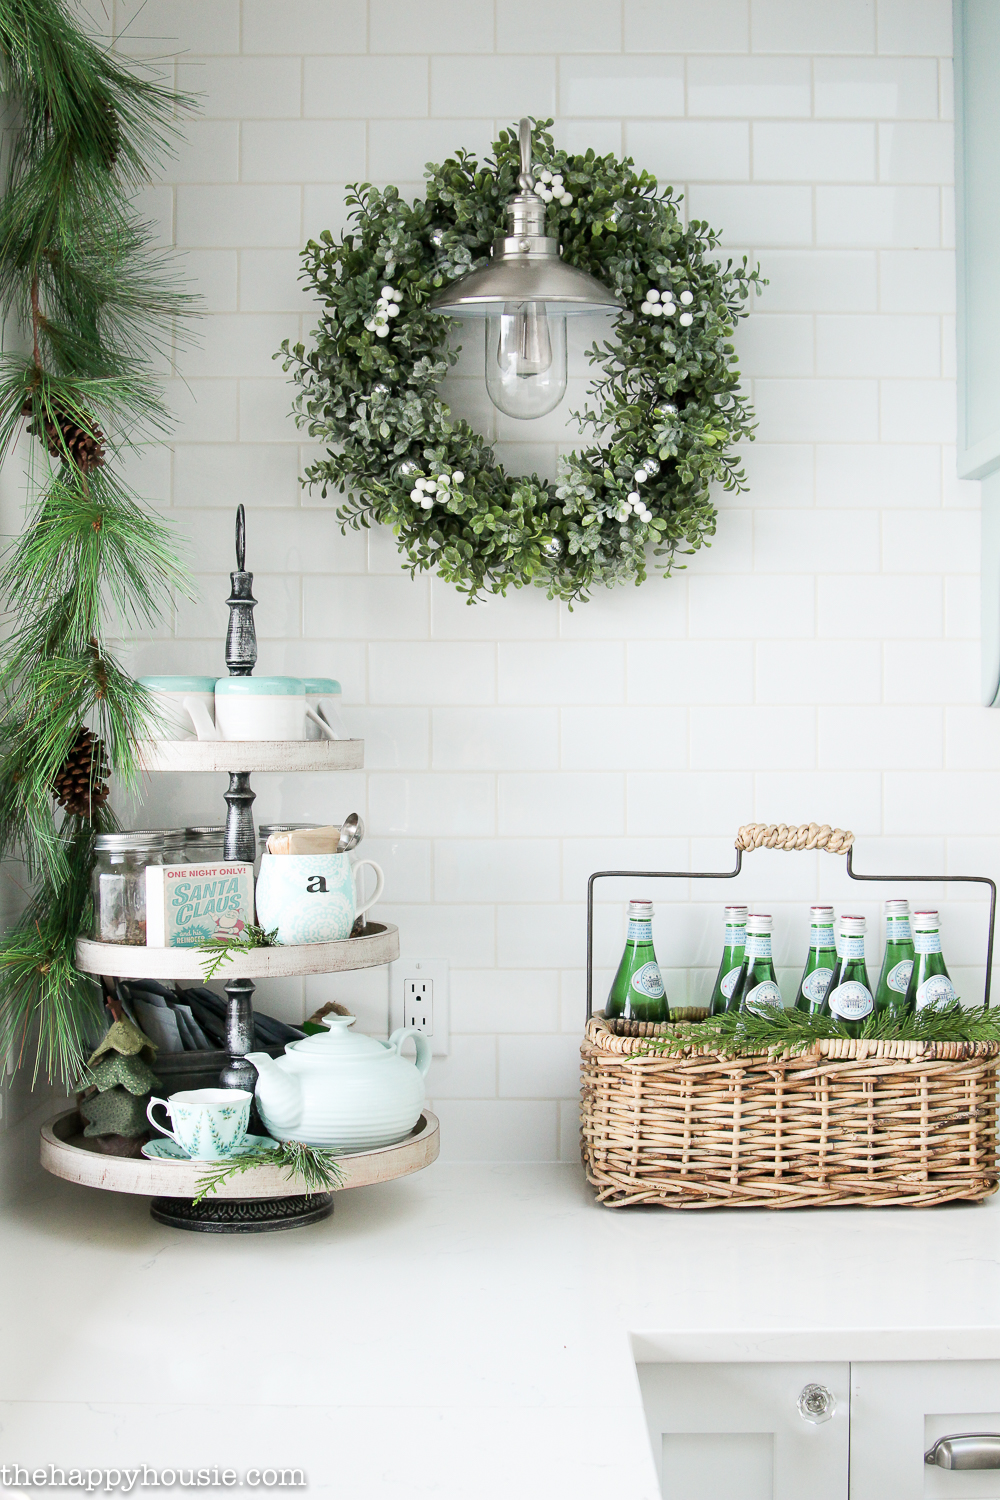 A green and white wreath plus a garland is by the tiered tray.